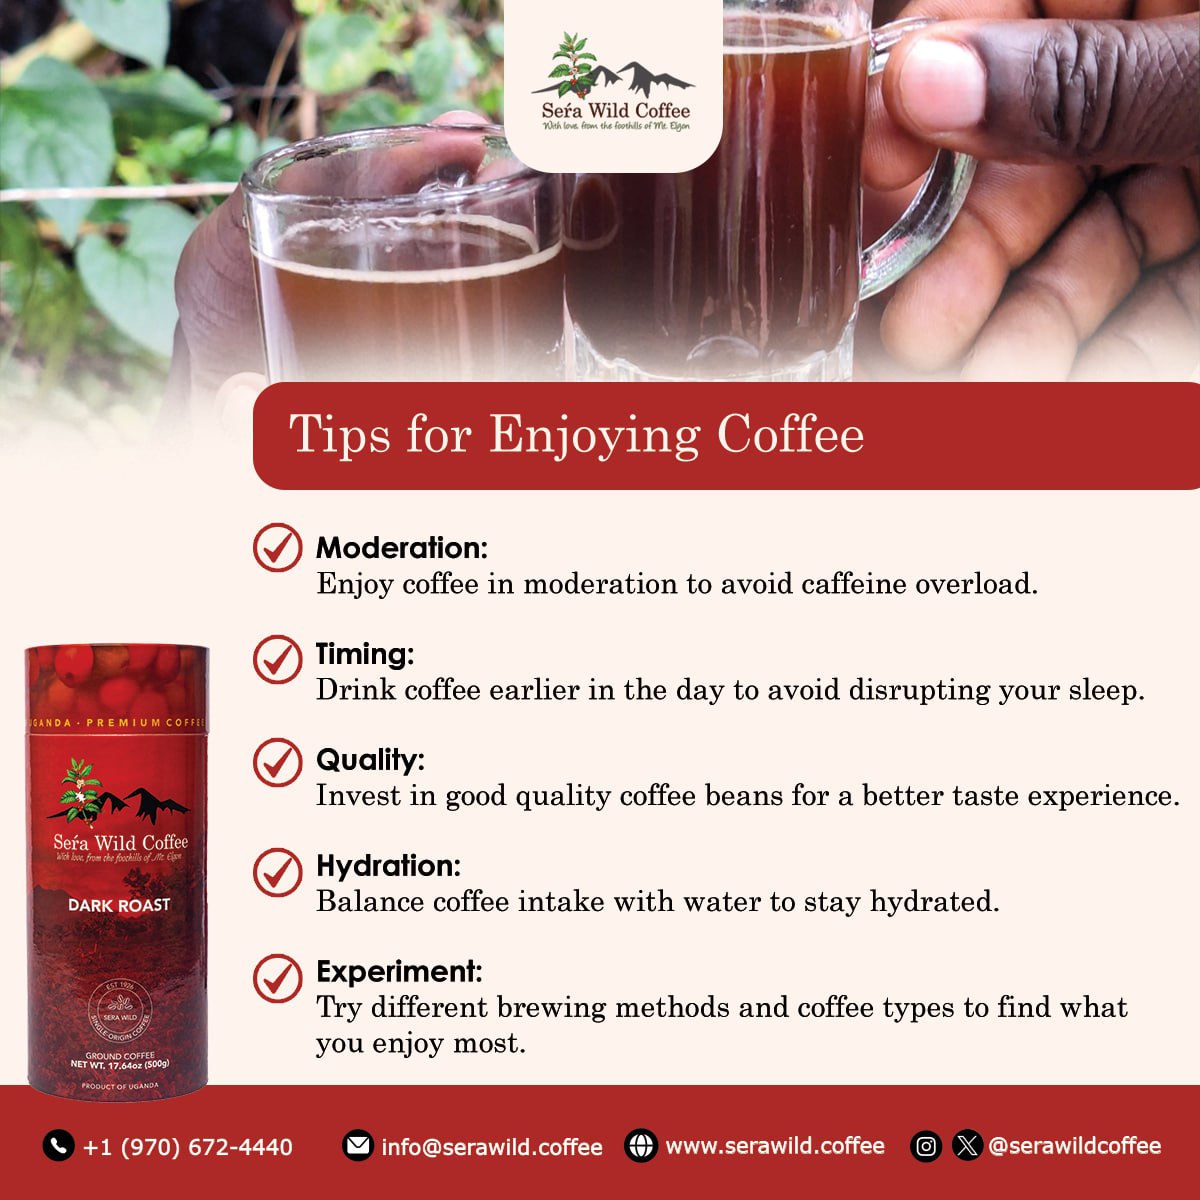 Want to enjoy coffee more, start your week, take note of some of these coffee tips: Discover new brewing methods, explore diverse origins, use fresh beans, experiment with recipes, and savor each sip mindfully for a flavorful start to your day.

#newweek #coffeetips #mondayvibes